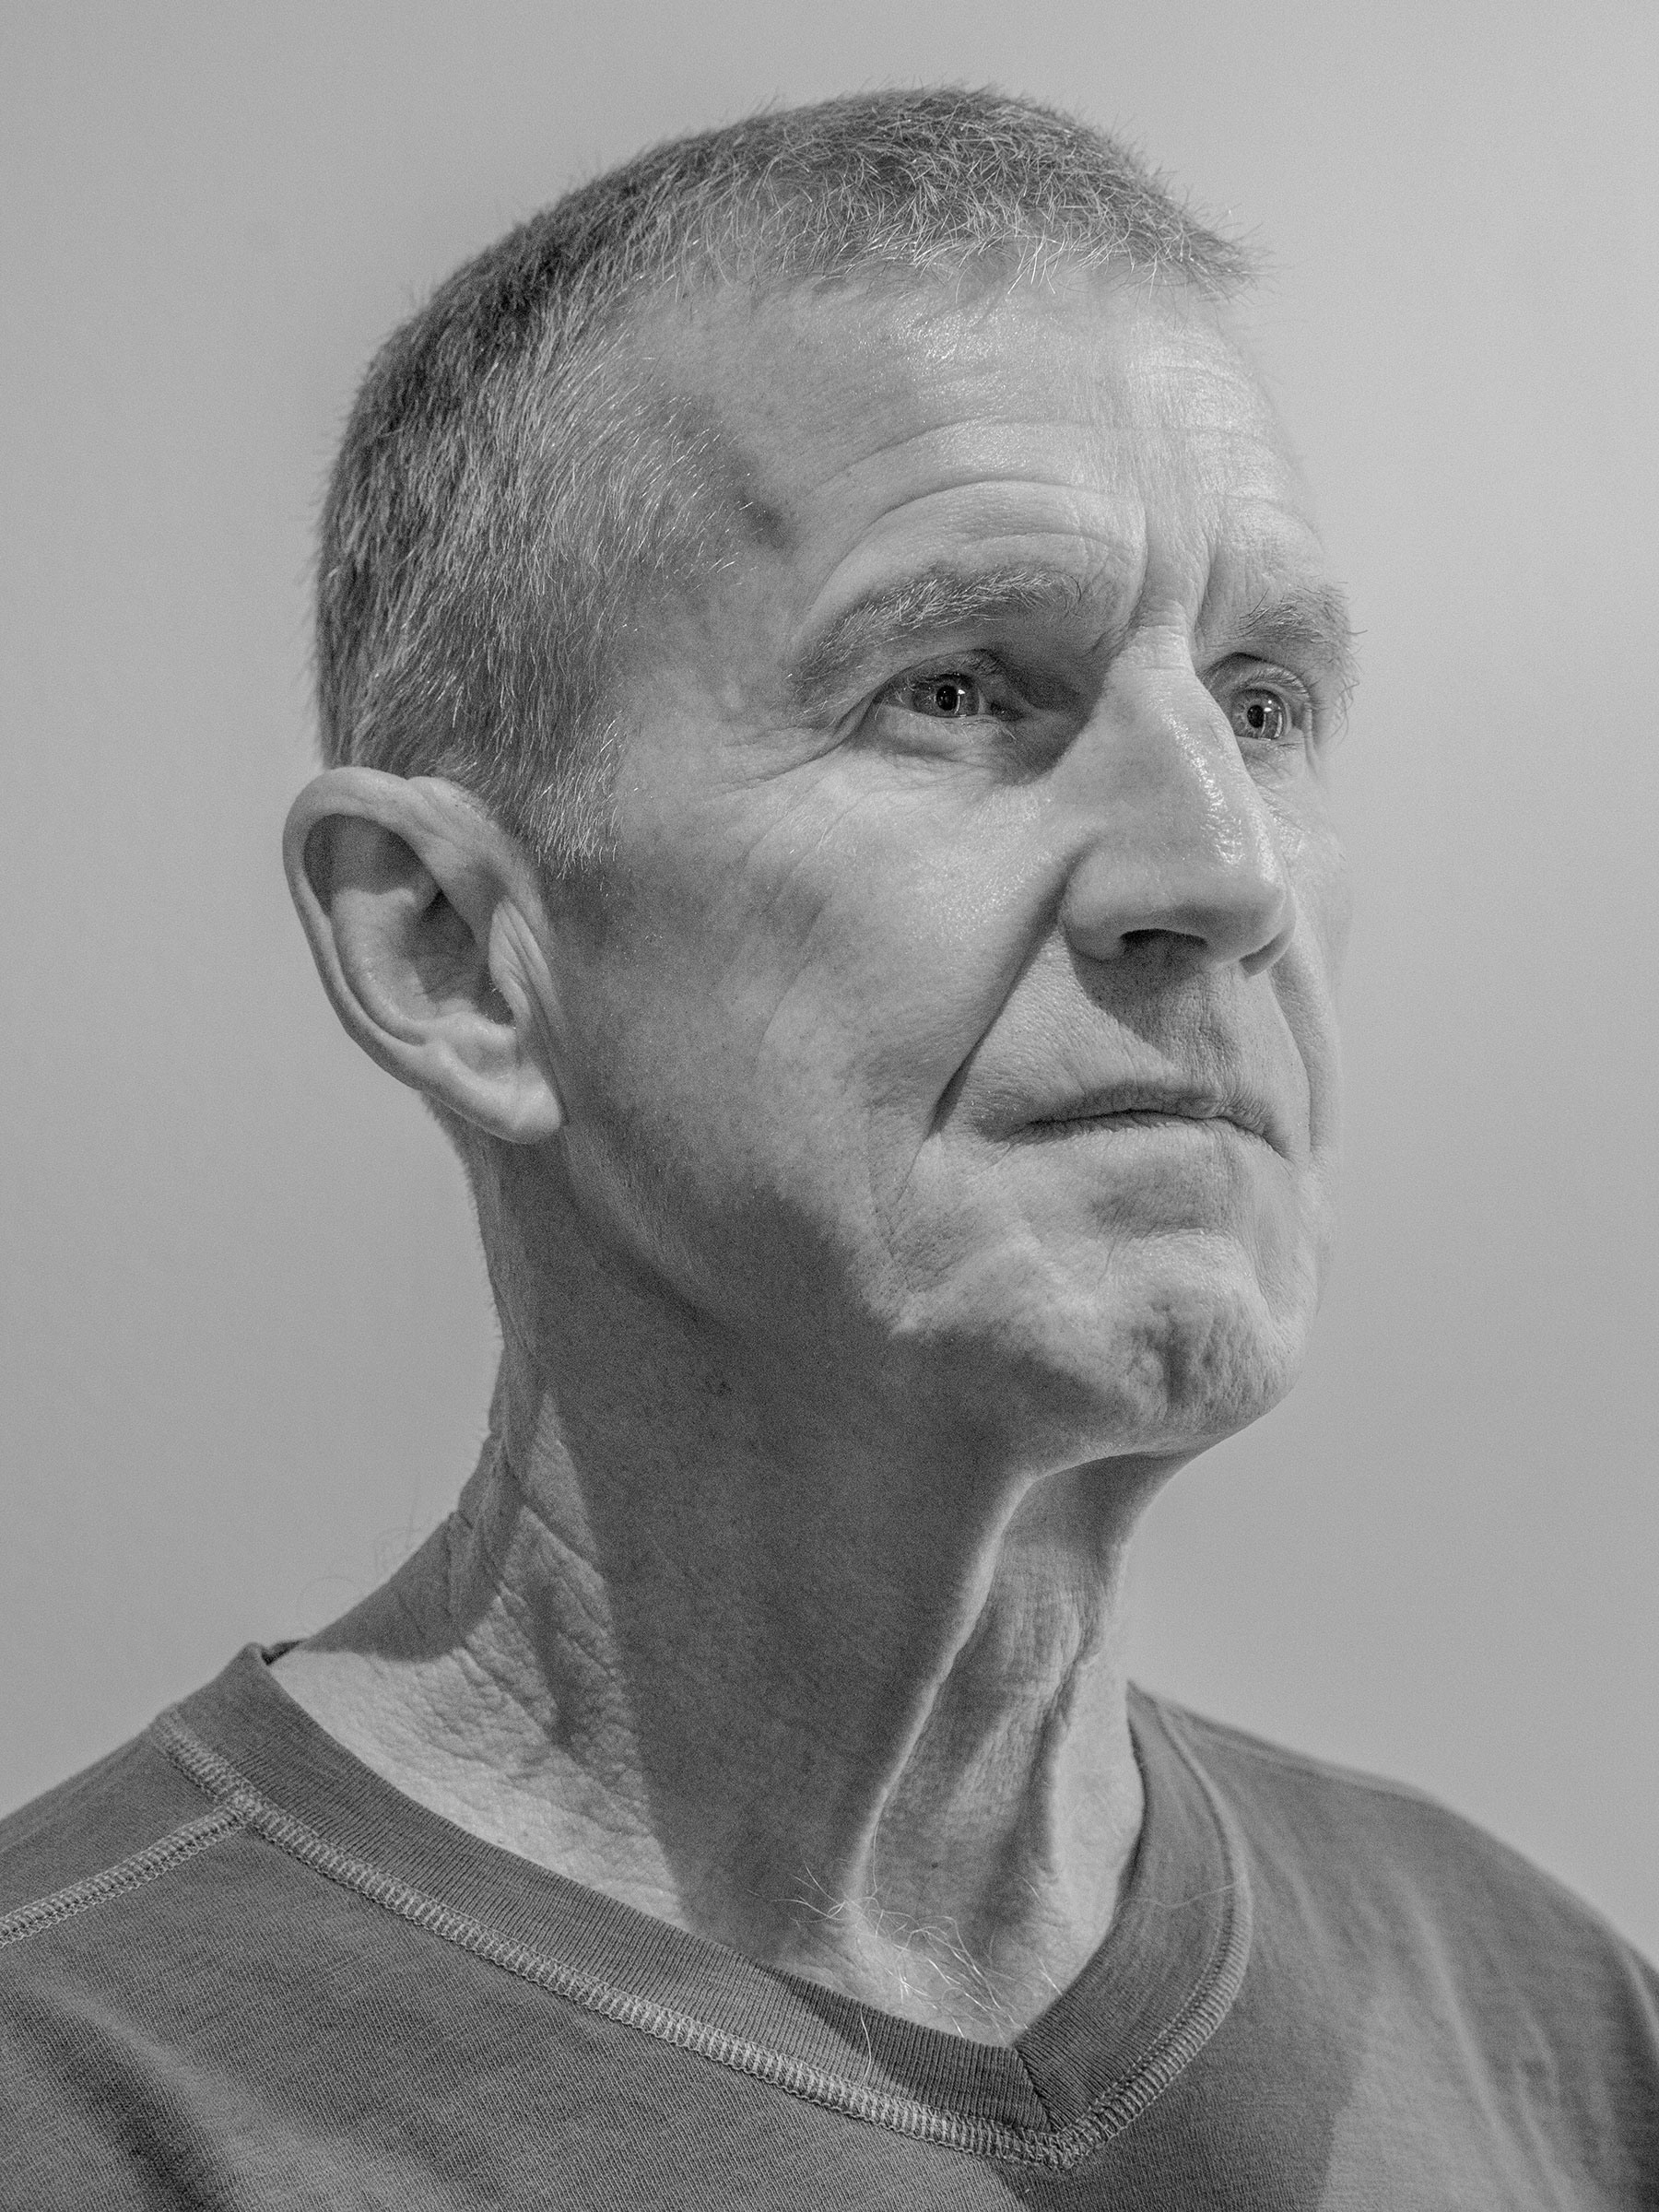 2021. USA. Alexandria, Virginia. Retired General Stanley McChrystal photographed at the offices of the McChrystal Group in Alexandria, Virginia.